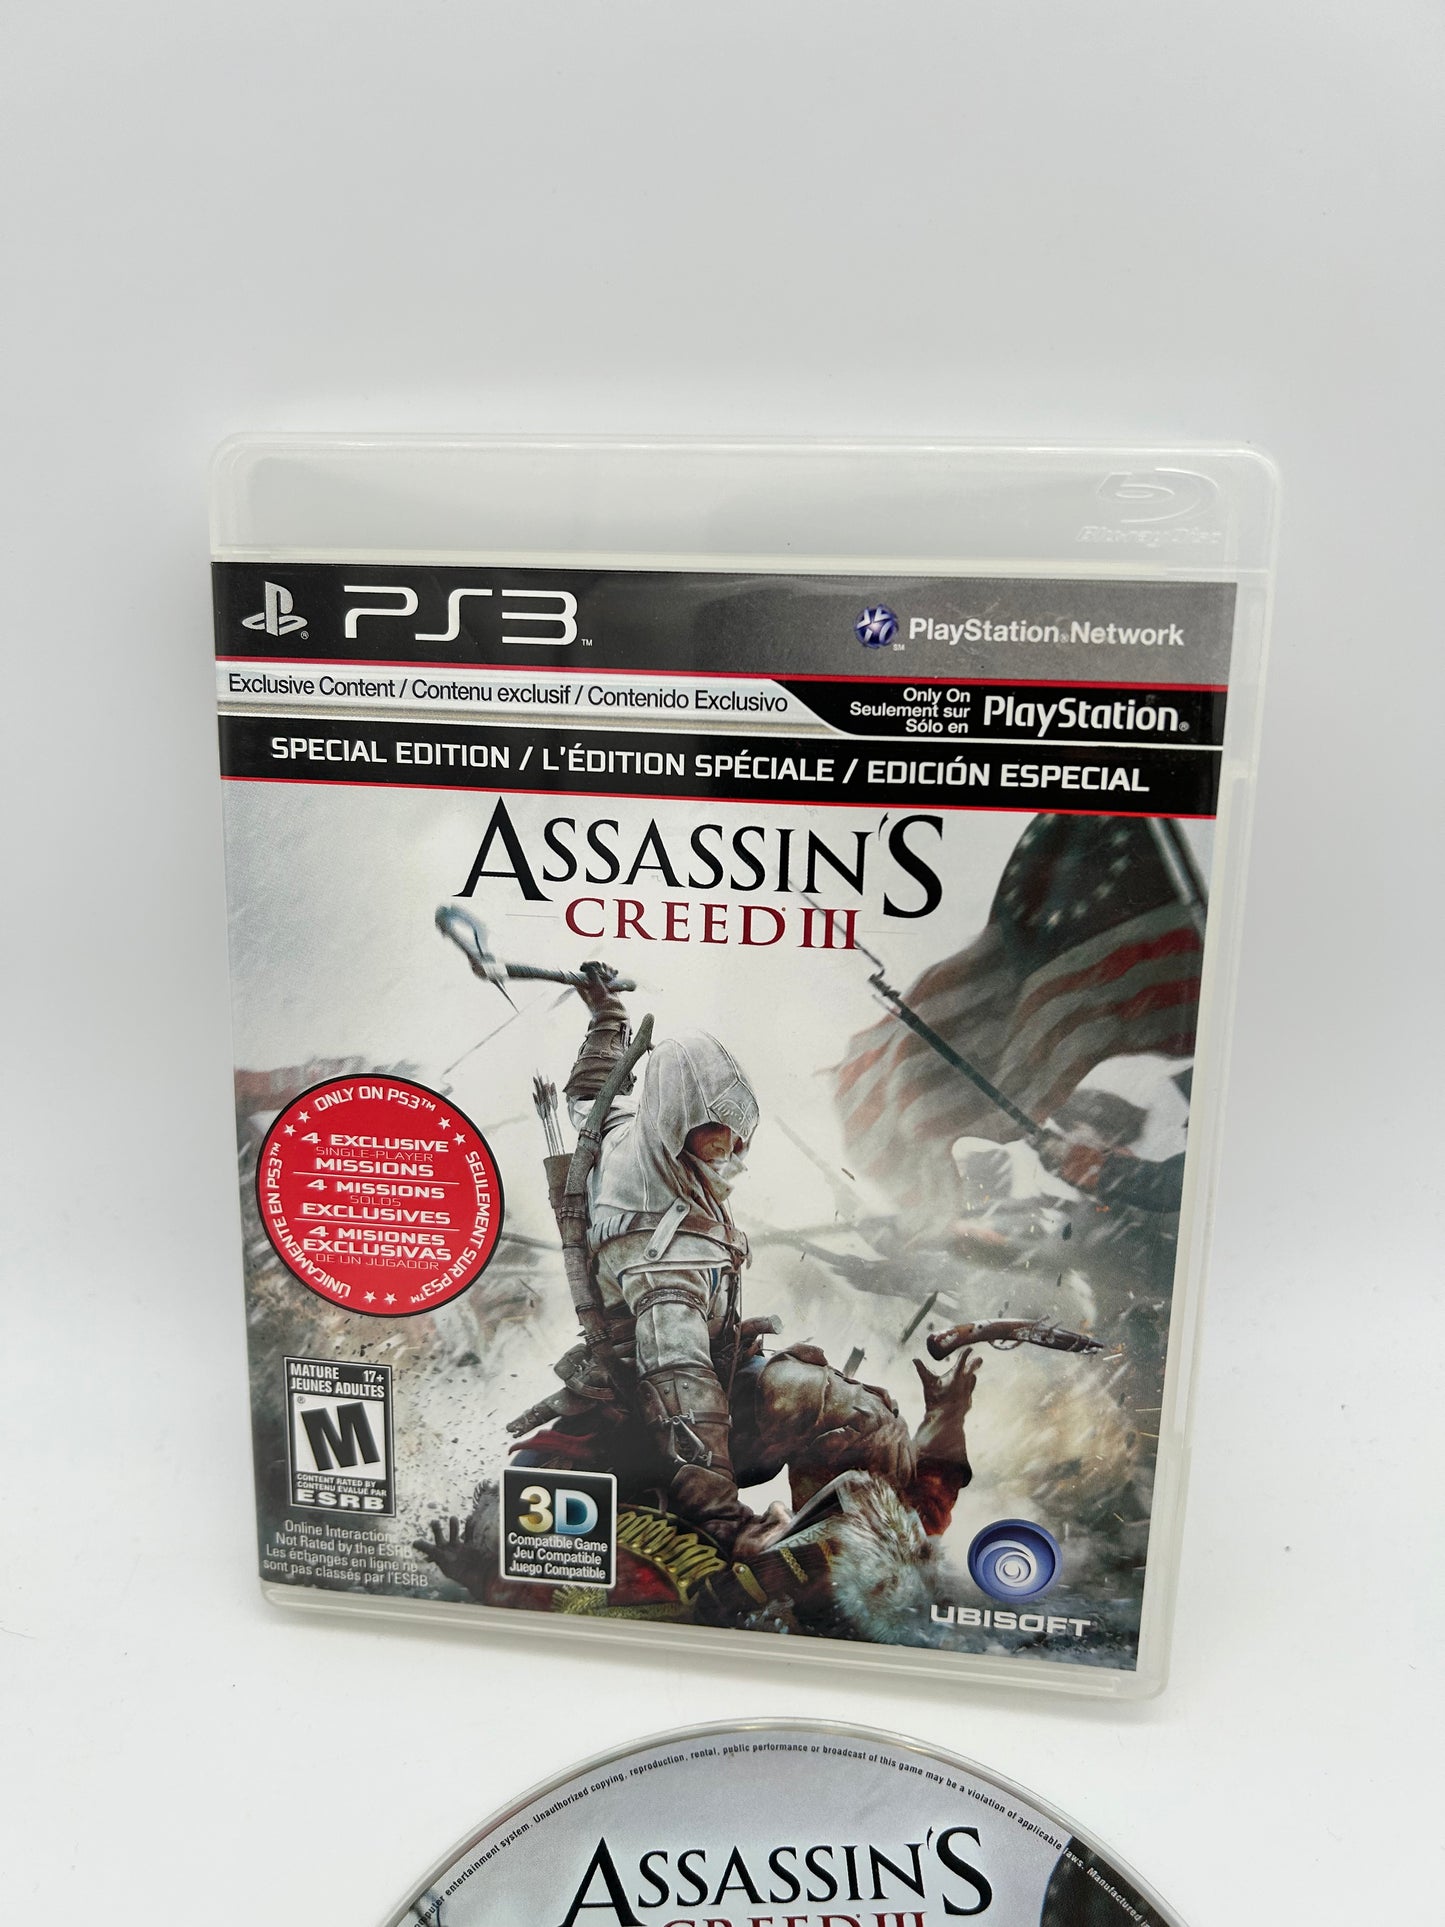 SONY PLAYSTATiON 3 [PS3] | ASSASSiNS CREED III | SPECiAL EDiTiON